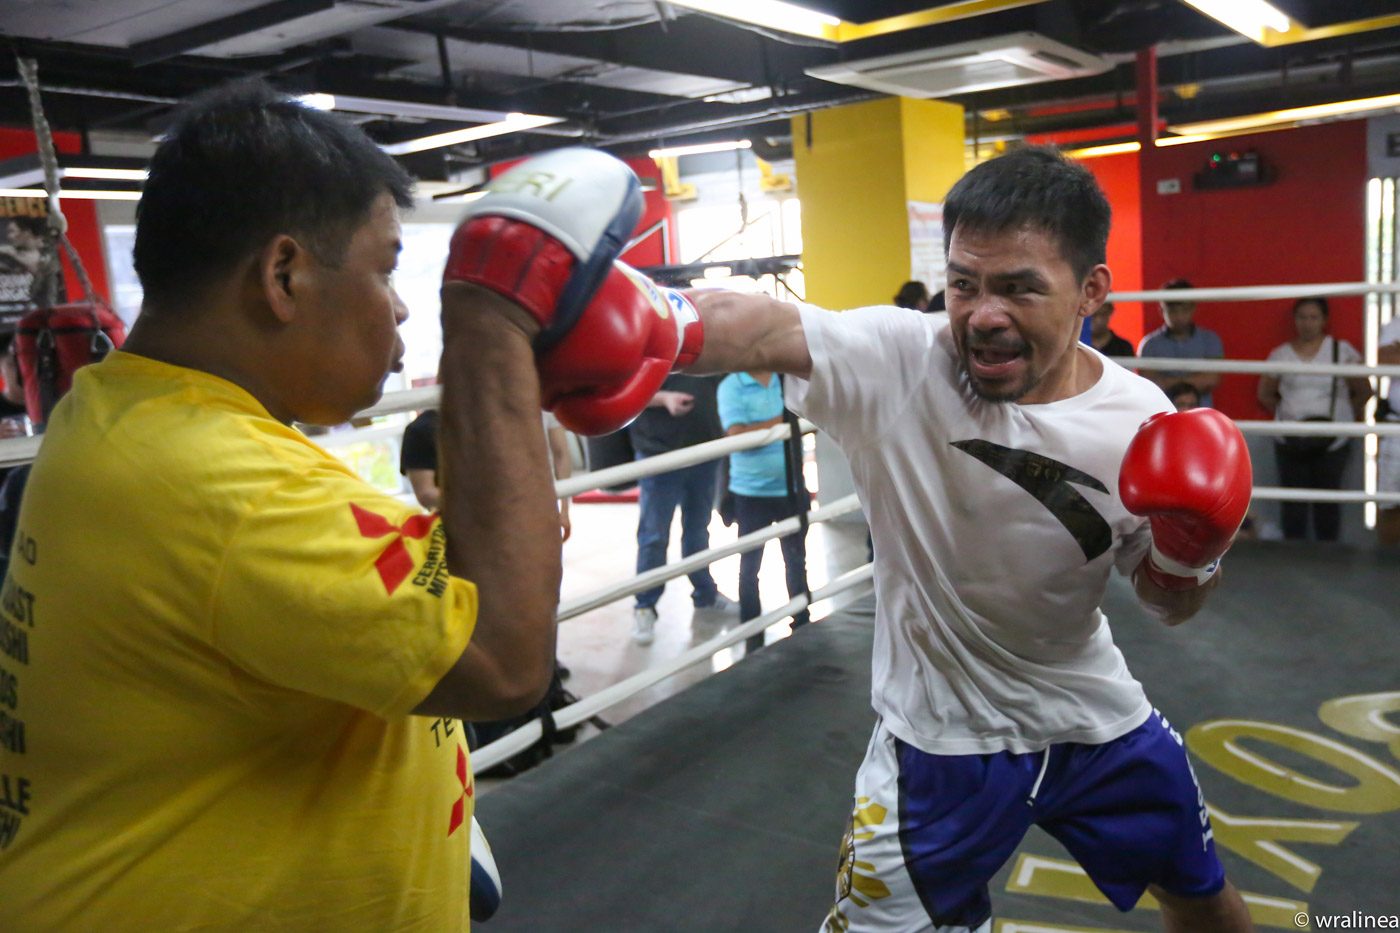 Lean Pacquiao sweats it out; Thurman way overweight